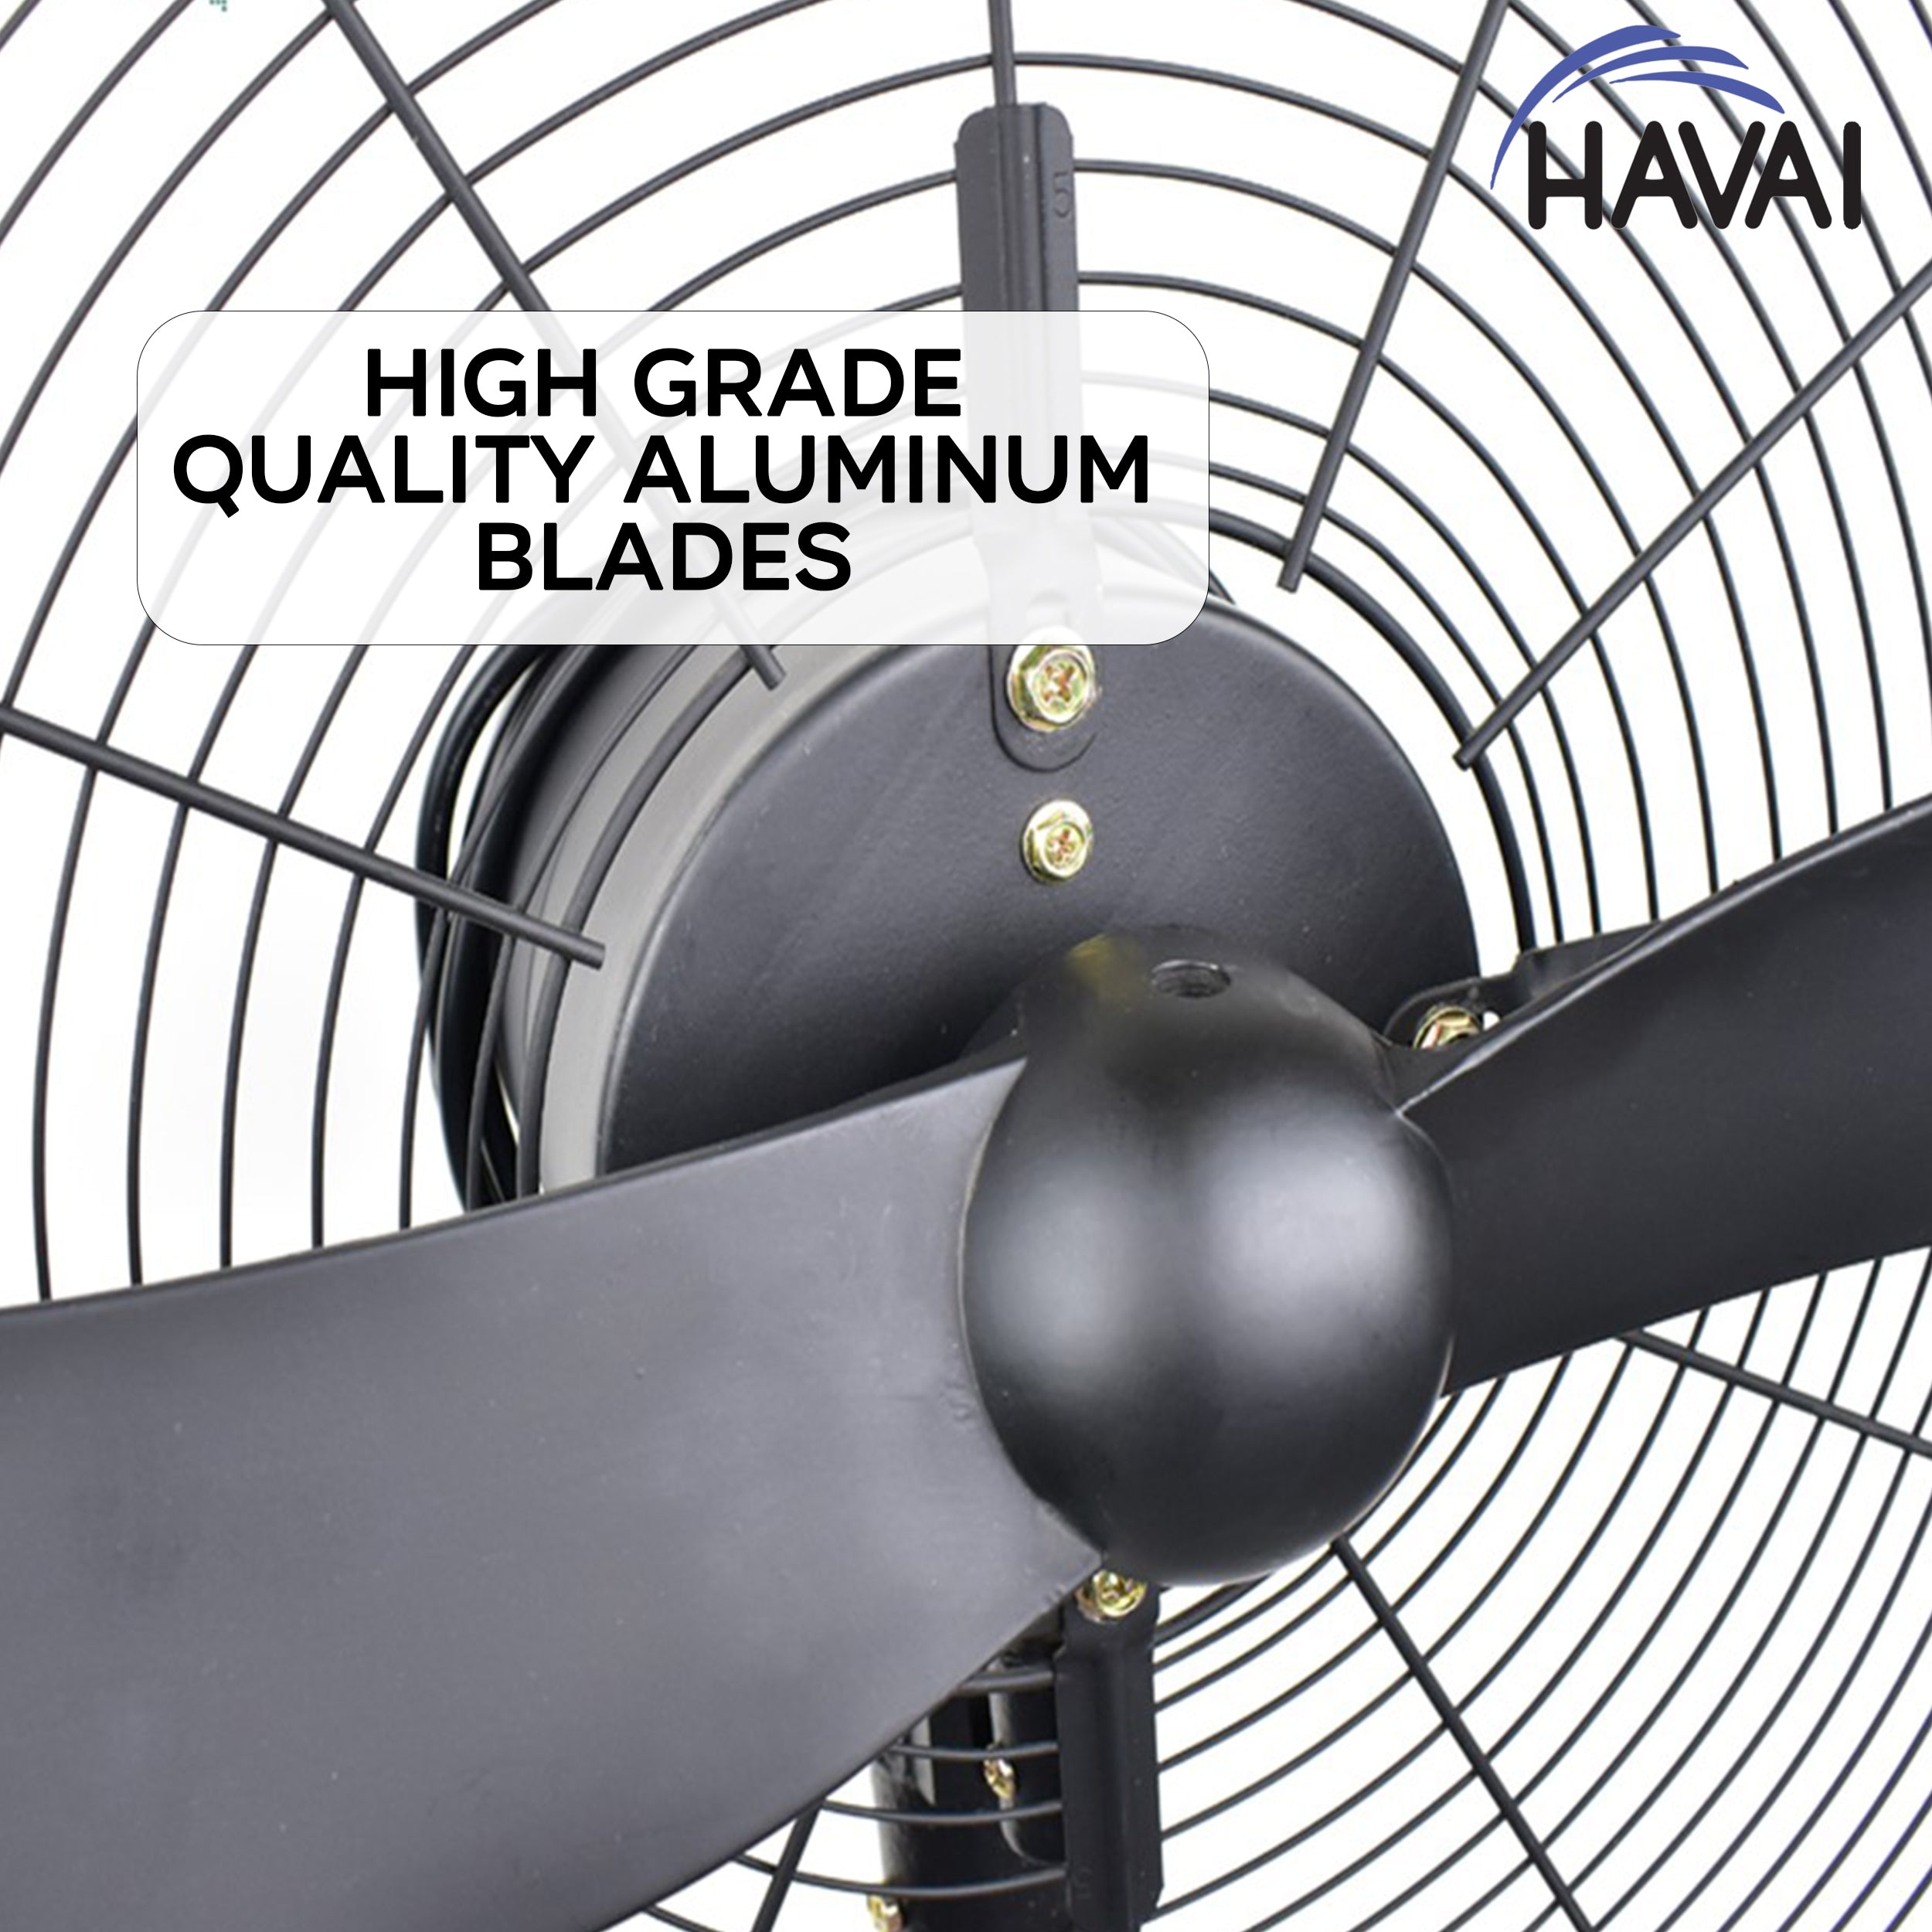 HAVAI BLDC Wall Mount Fan 26 inch, 50% Savings on Electricity, High Velocity, Heavy Duty Metal for Industrial, Commercial and Residential Use, Assembly Included